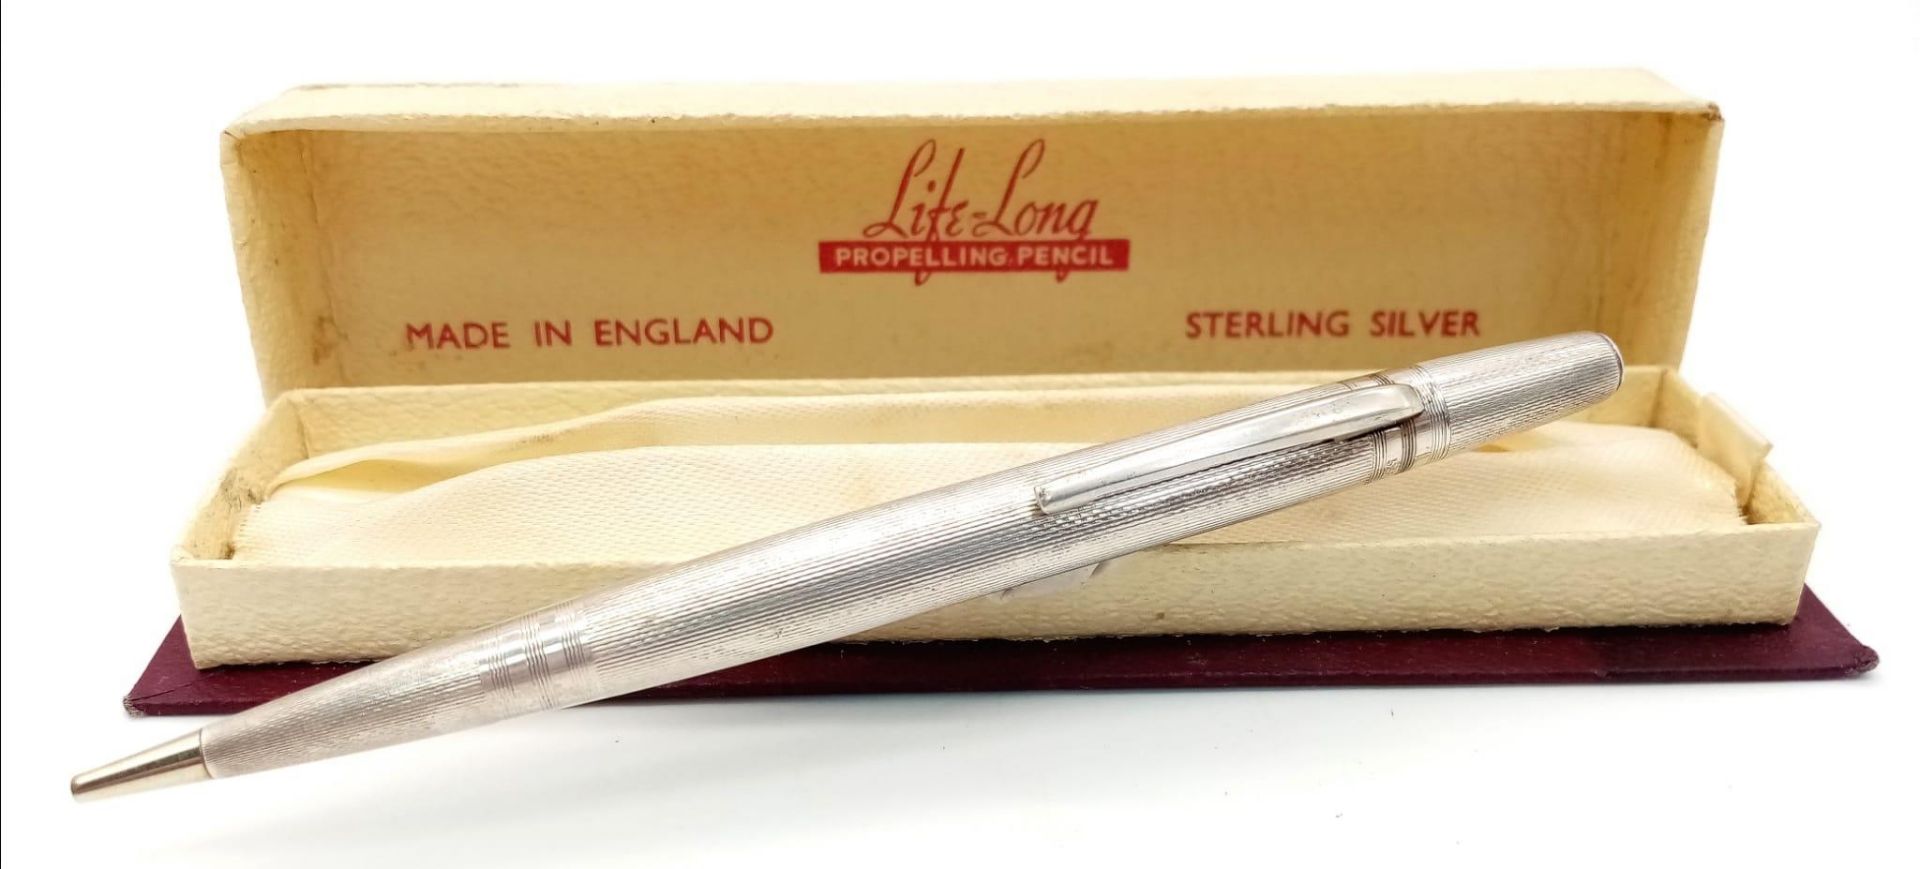 A Vintage Life Long Sterling Silver Propelling Pencil. Comes in original packaging. 20g - Image 4 of 5